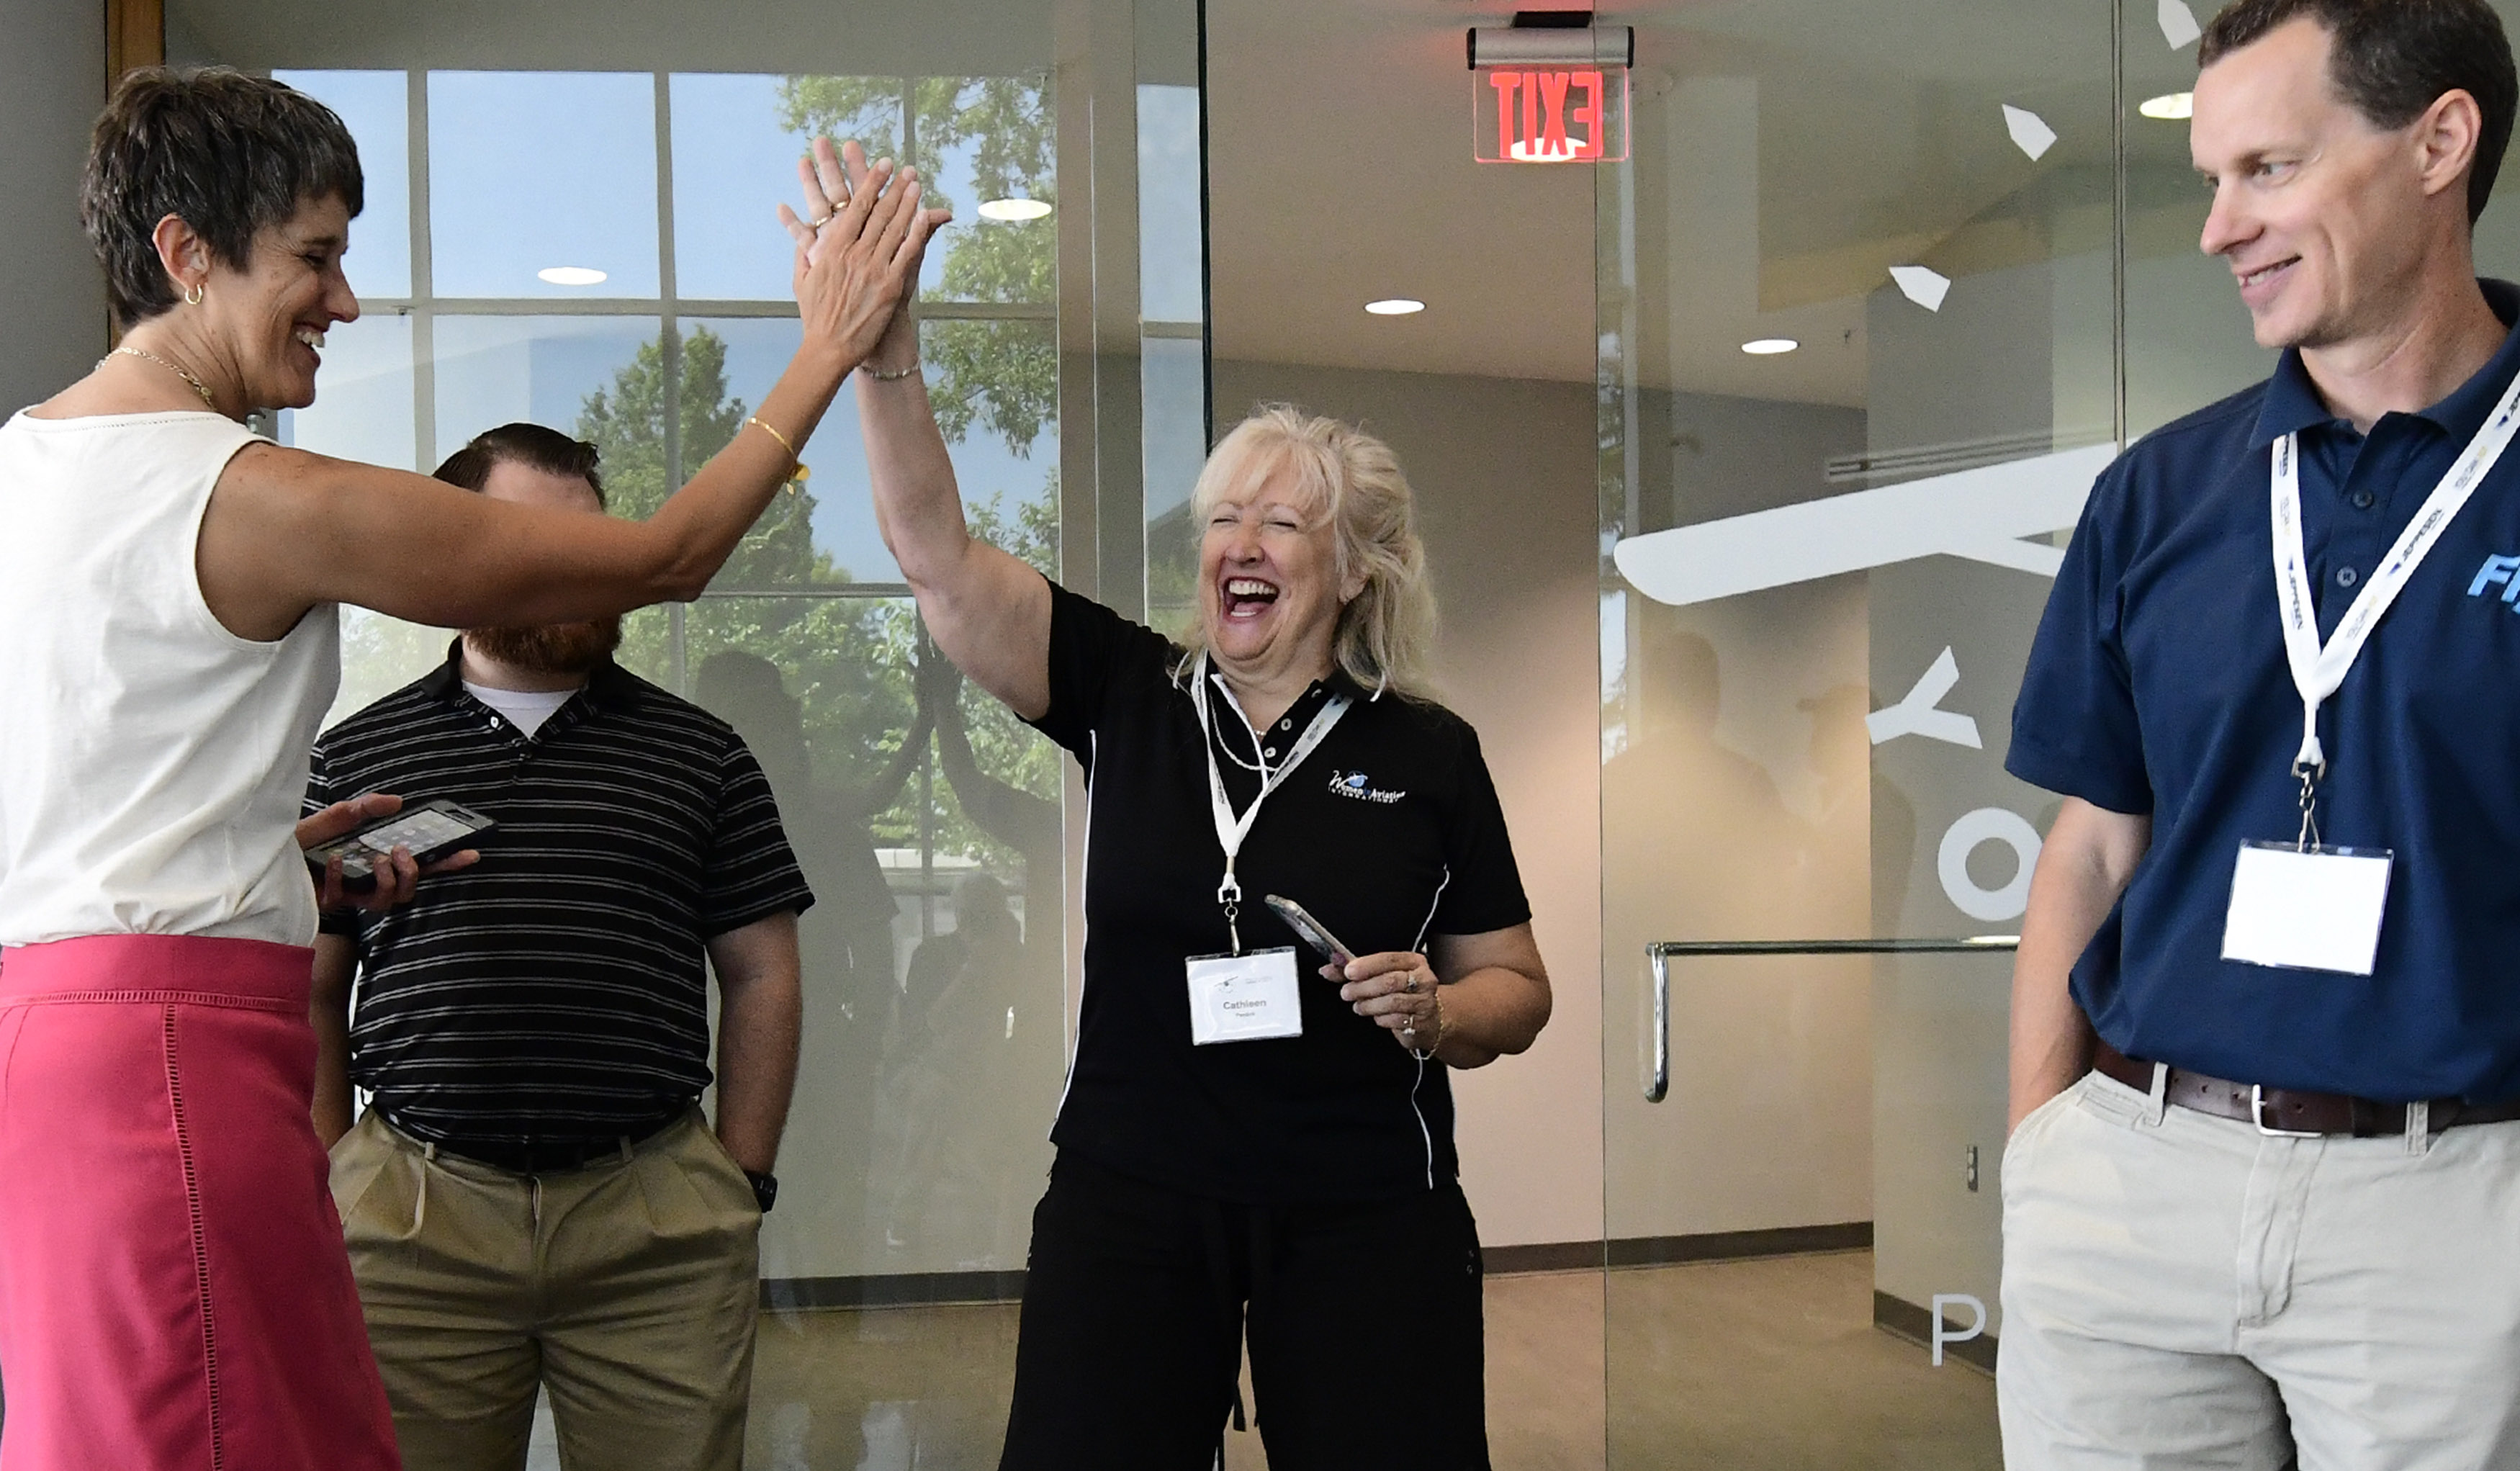 High school teacher and helicopter instructor Cathleen Perdok is congratulated by Cindy Hasselbring, AOPA senior director of the high school initiative, after flying a small drone to its landing station during an introduction of the AOPA You Can Fly tenth-grade science, technology, engineering, and math aviation-based curriculum. Photo by David Tulis.